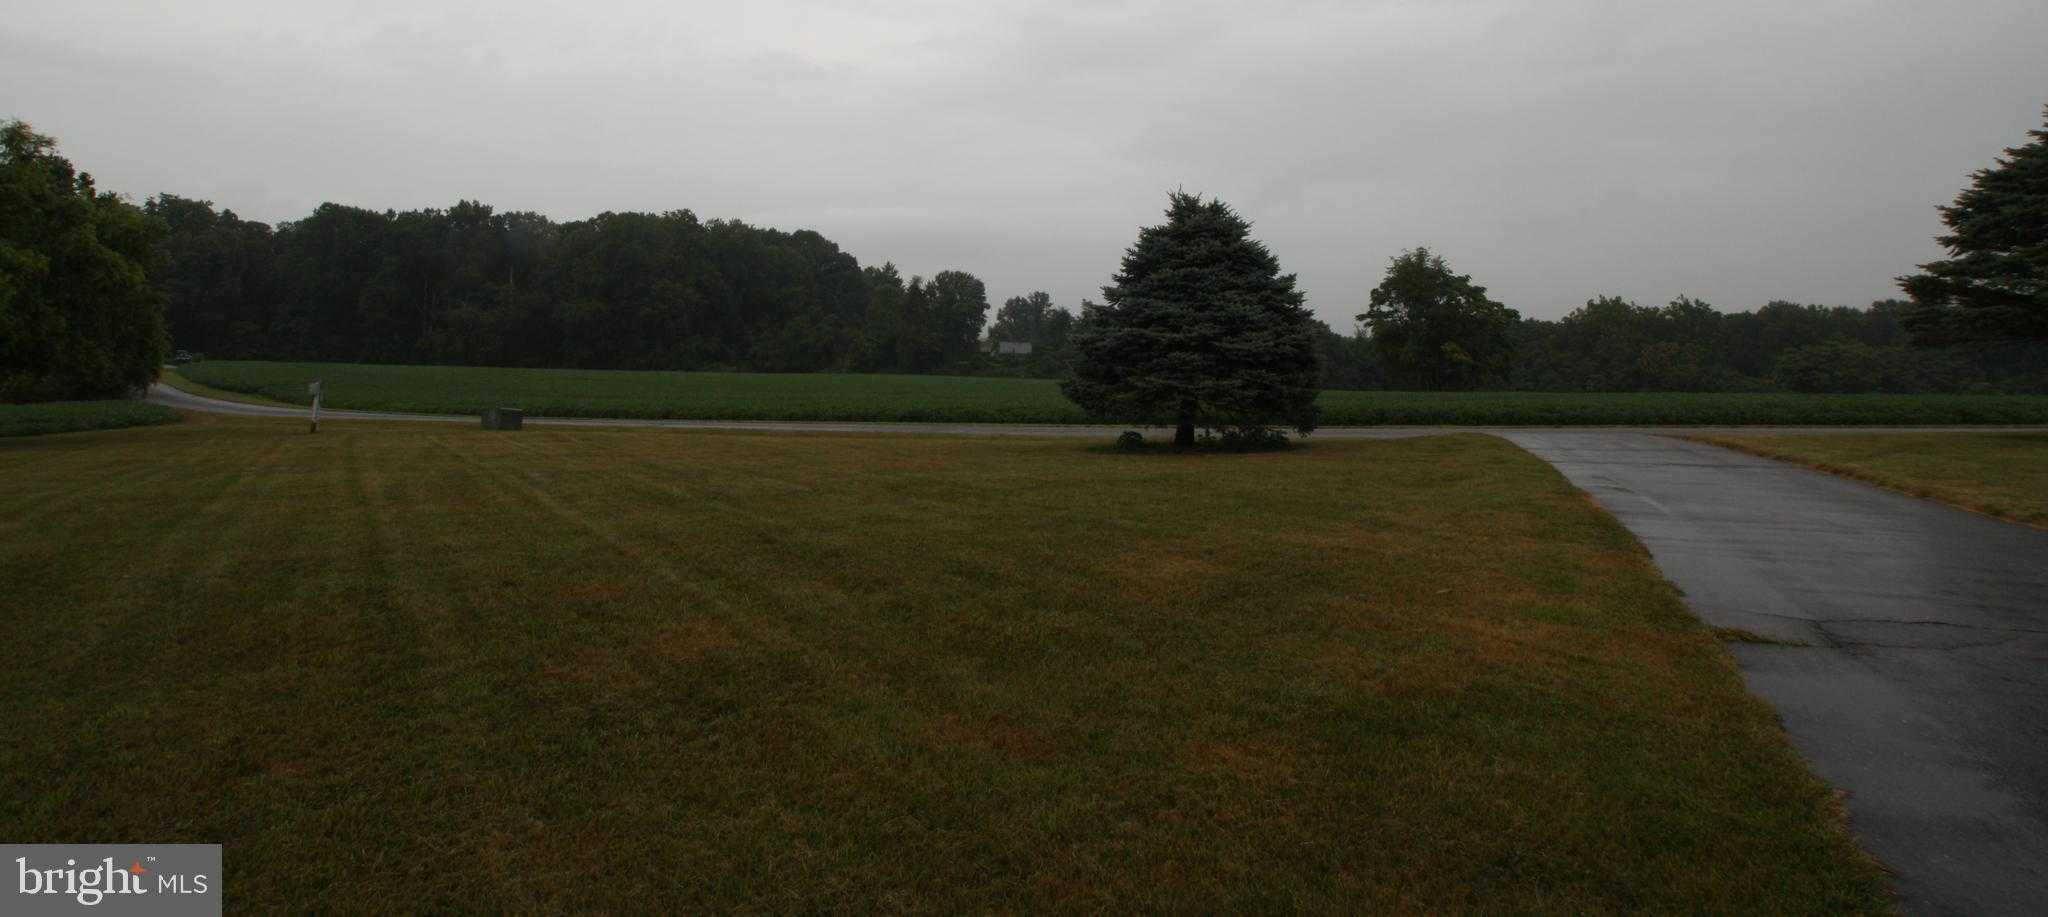 View DICKERSON, MD 20842 land